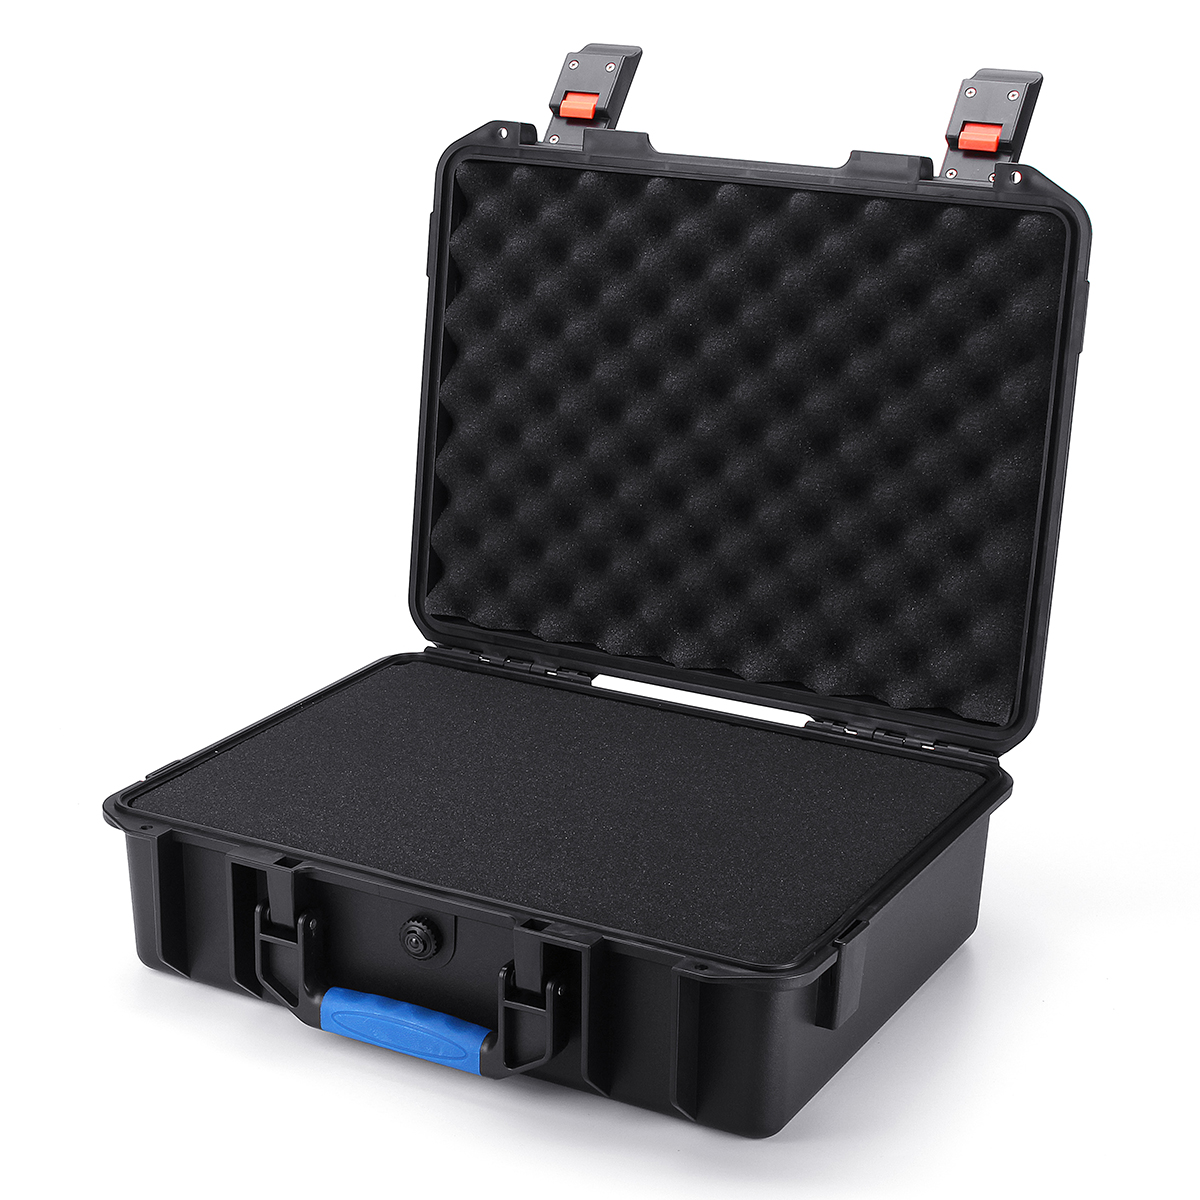 Waterproof-Hard-Carry-Case-Tool-Kits-Impact-Resistant-Shockproof-Storage-Box-Safety-Hardware-toolbox-1665199-4